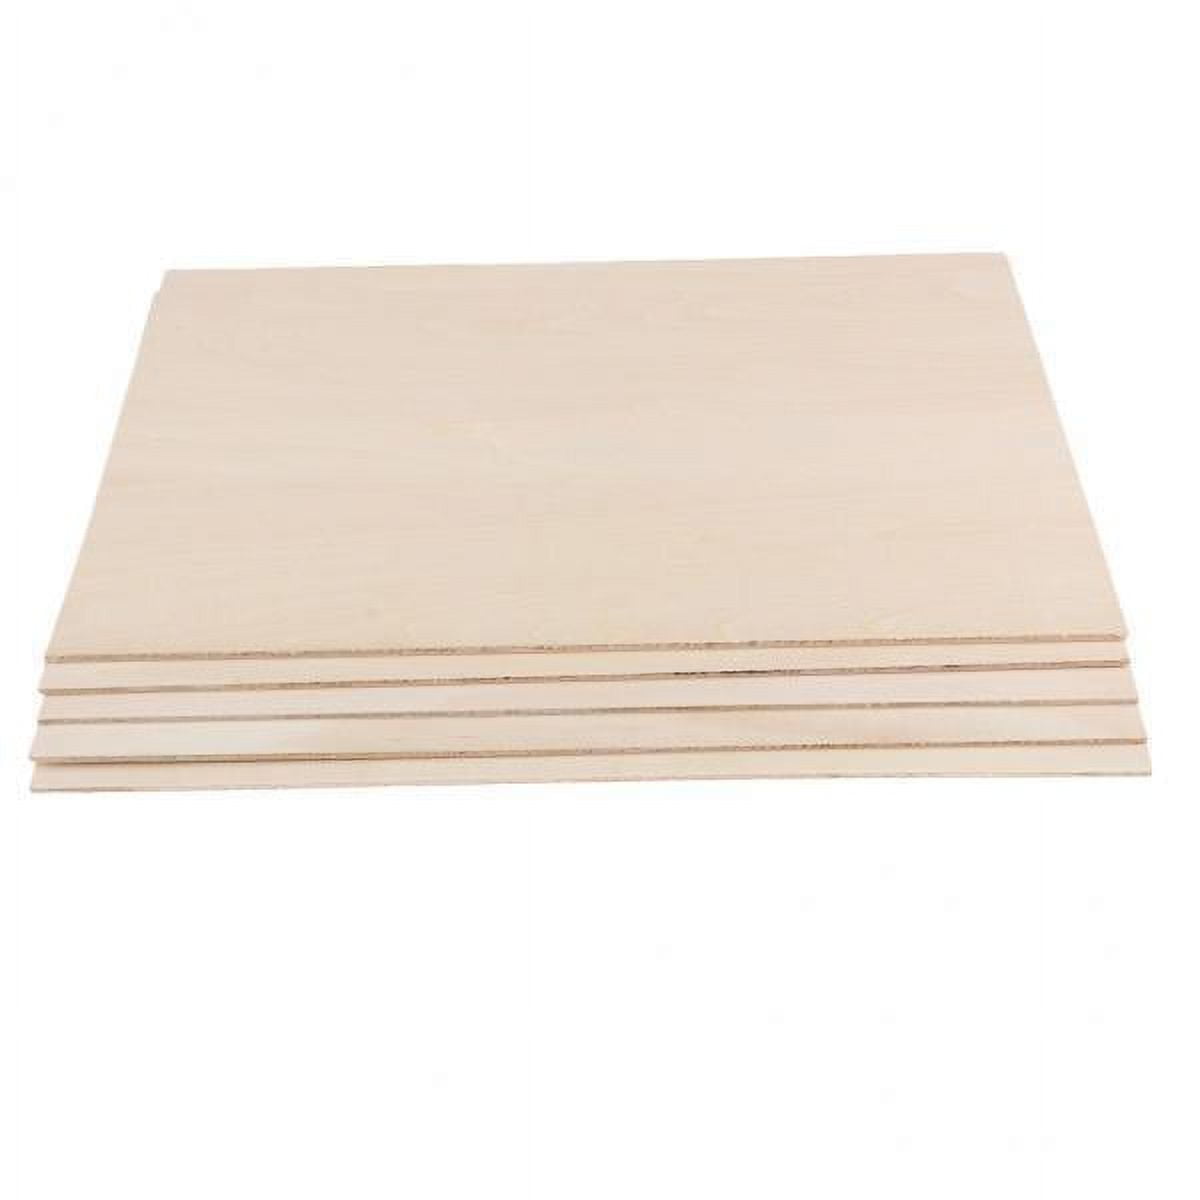 Unfinished Wood, 20pcs Balsa Wood Sheets, Basswood Thin Board for House Aircraft Ship Boat Arts and Crafts, School Projects, Wooden DIY Ornaments